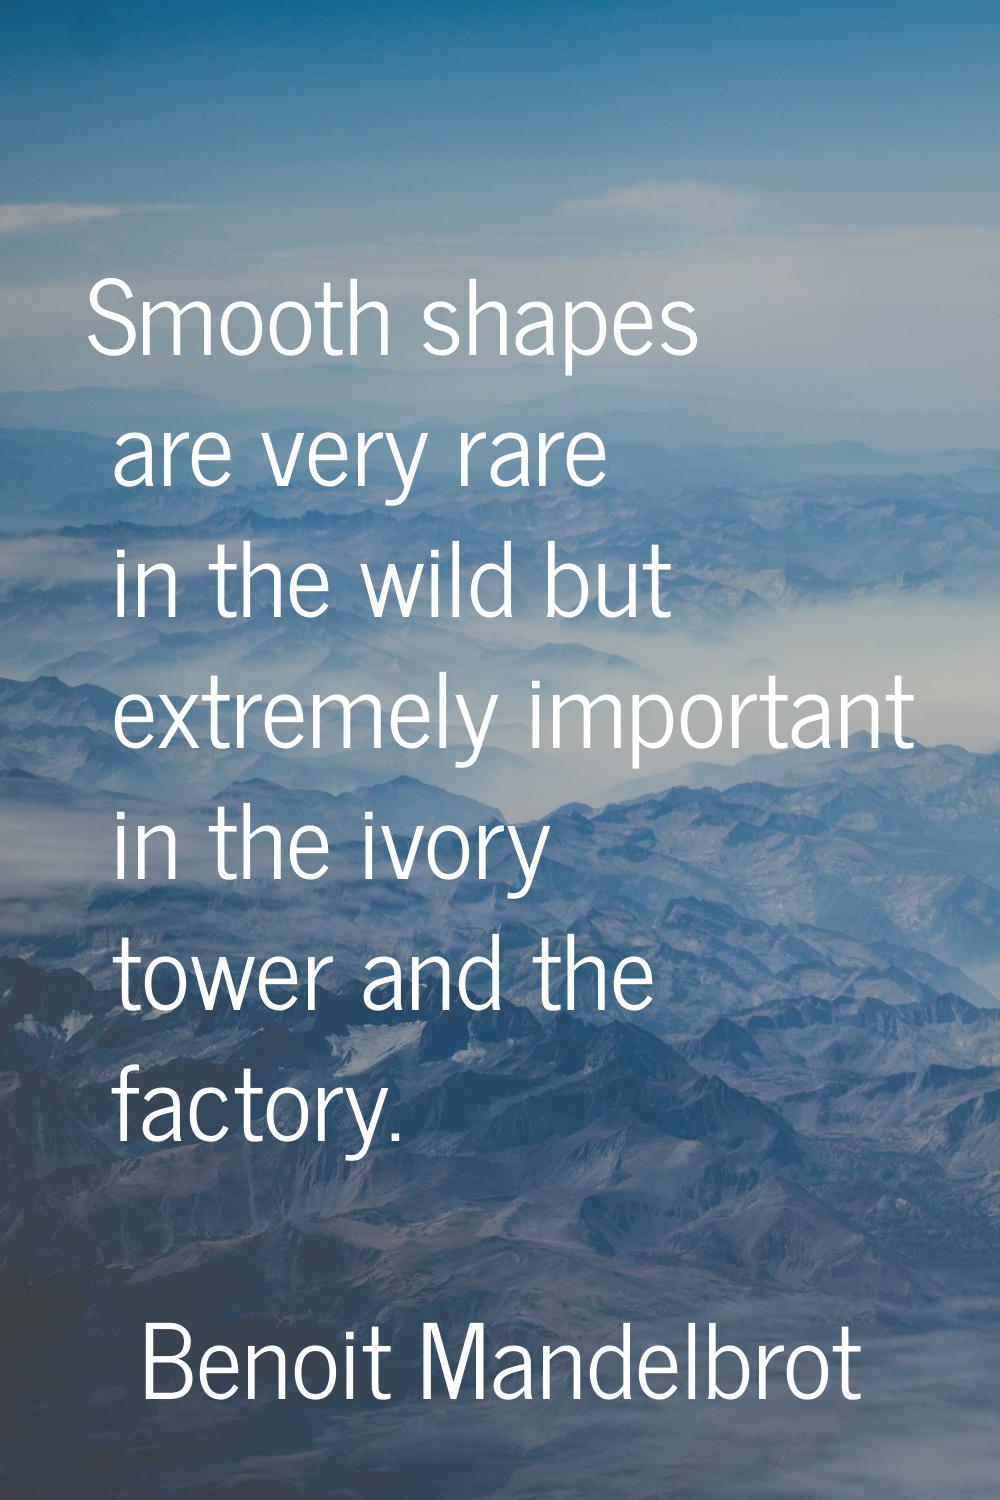 Smooth shapes are very rare in the wild but extremely important in the ivory tower and the factory.